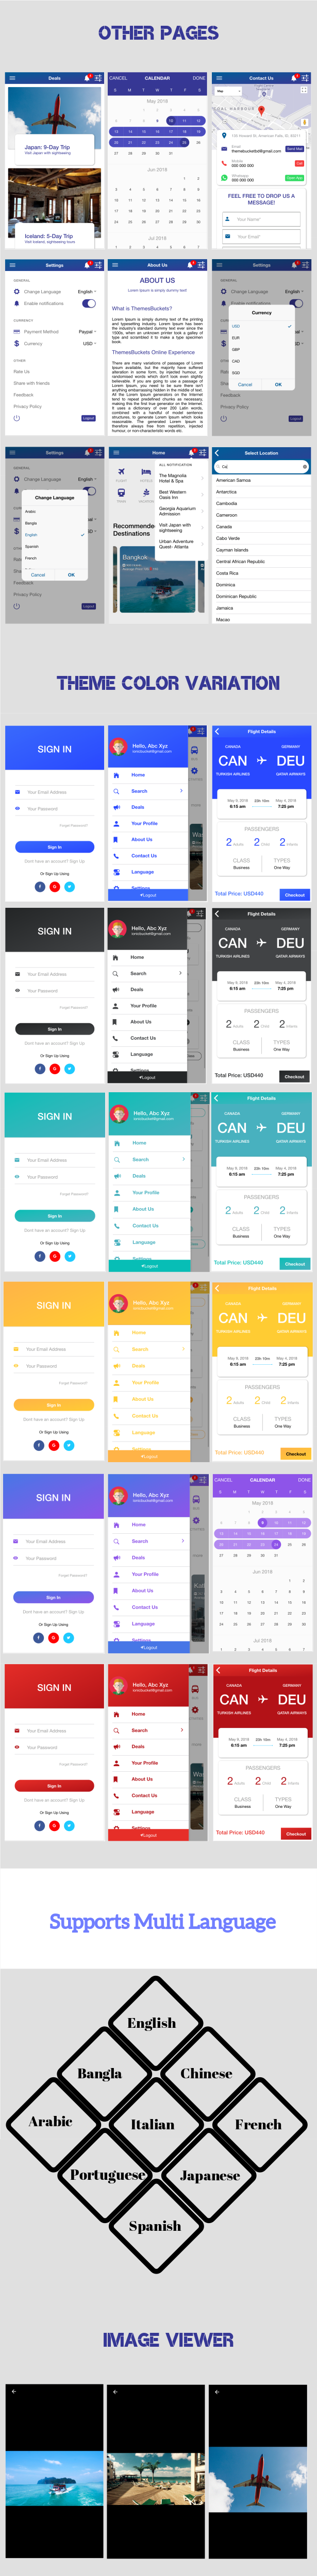 Ionic 3 Travel Agency Booking System Theme App Supports Multi Language - 3